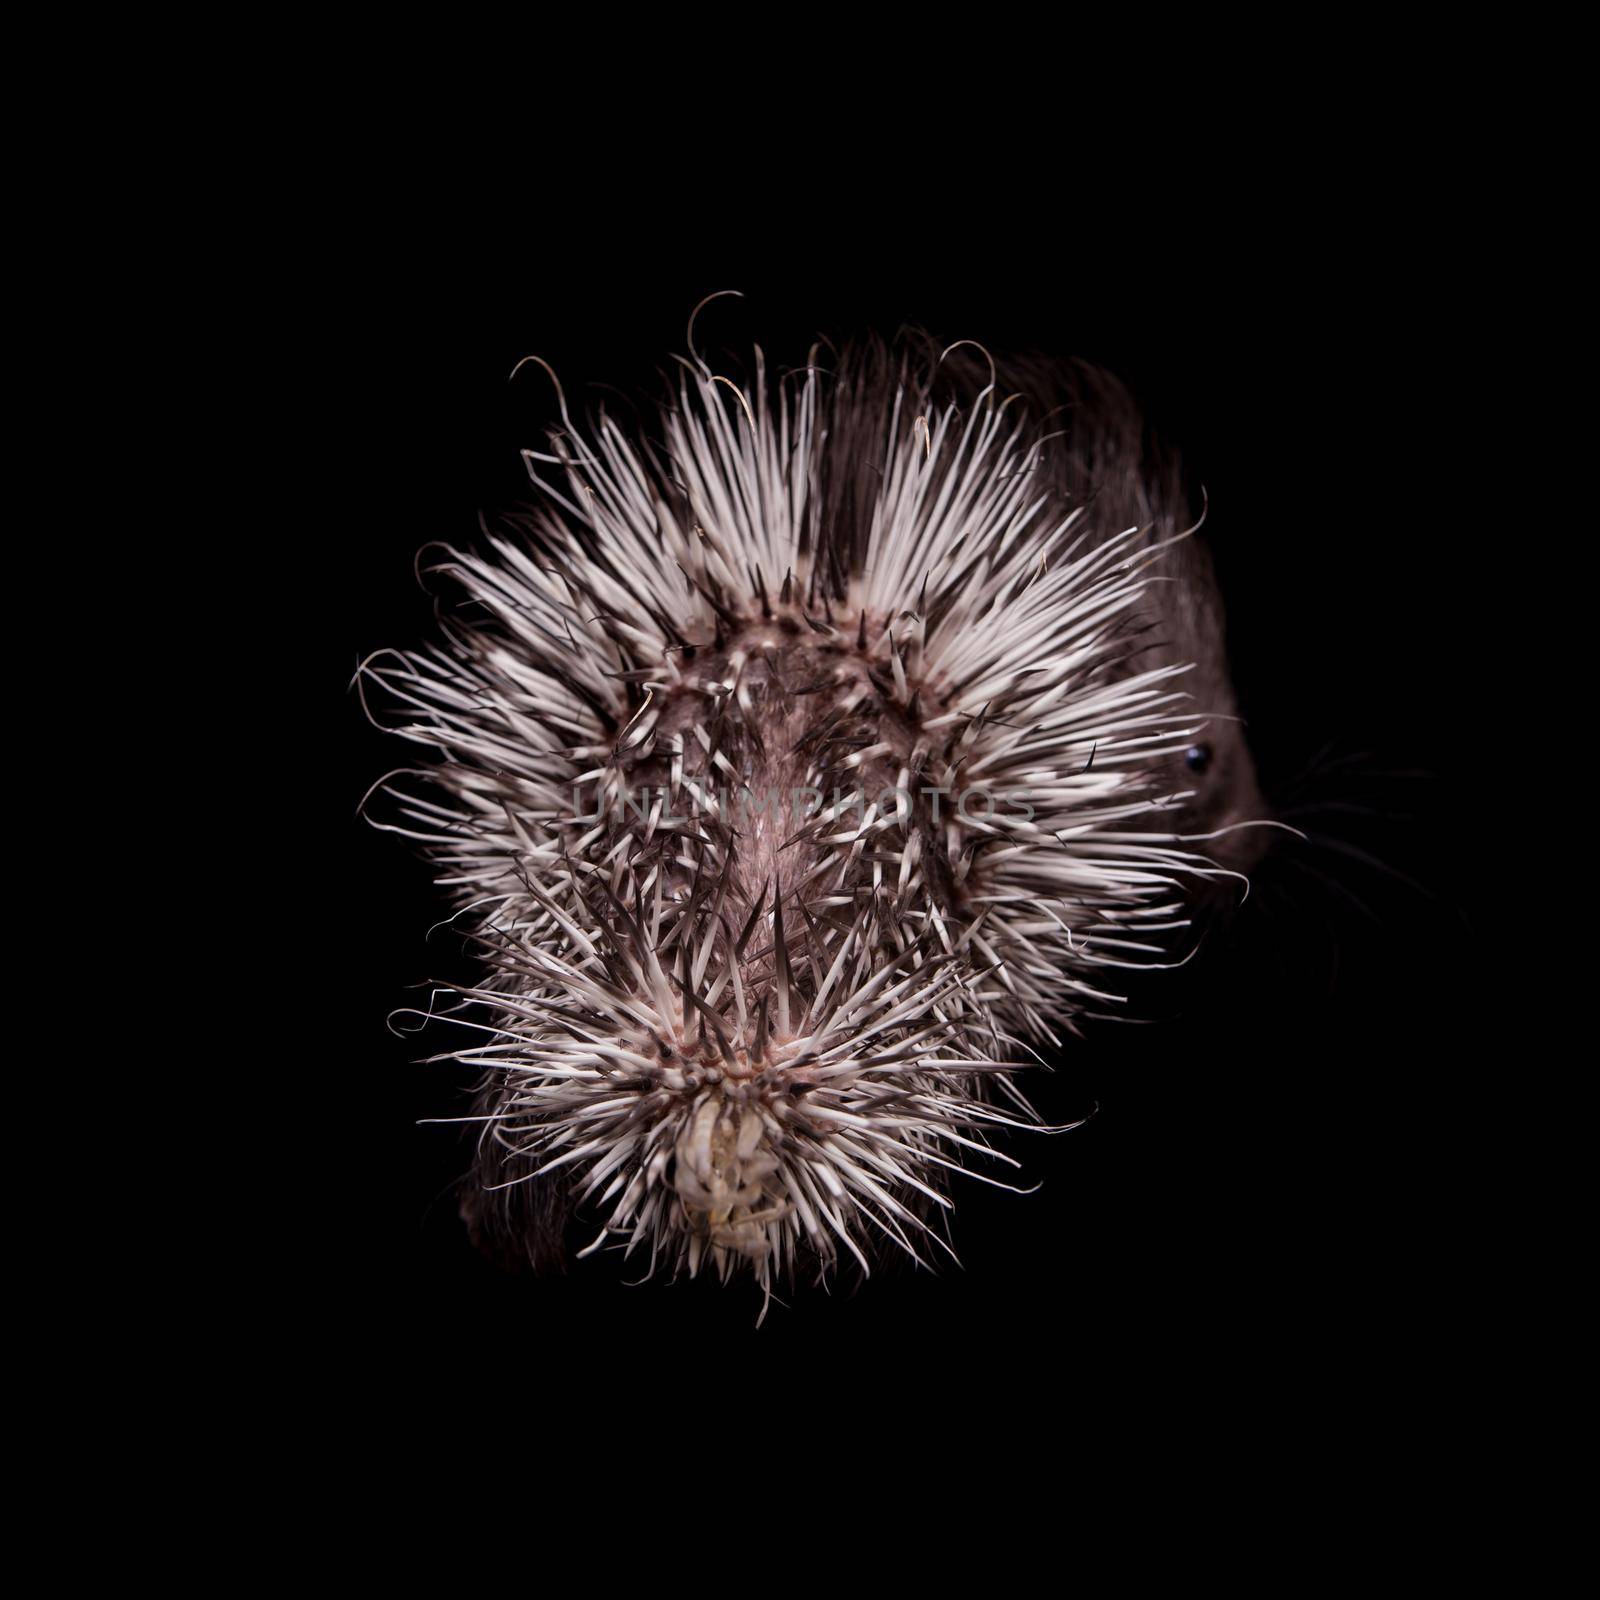 Indian crested Porcupine baby, Hystrix indica, isolated on black background